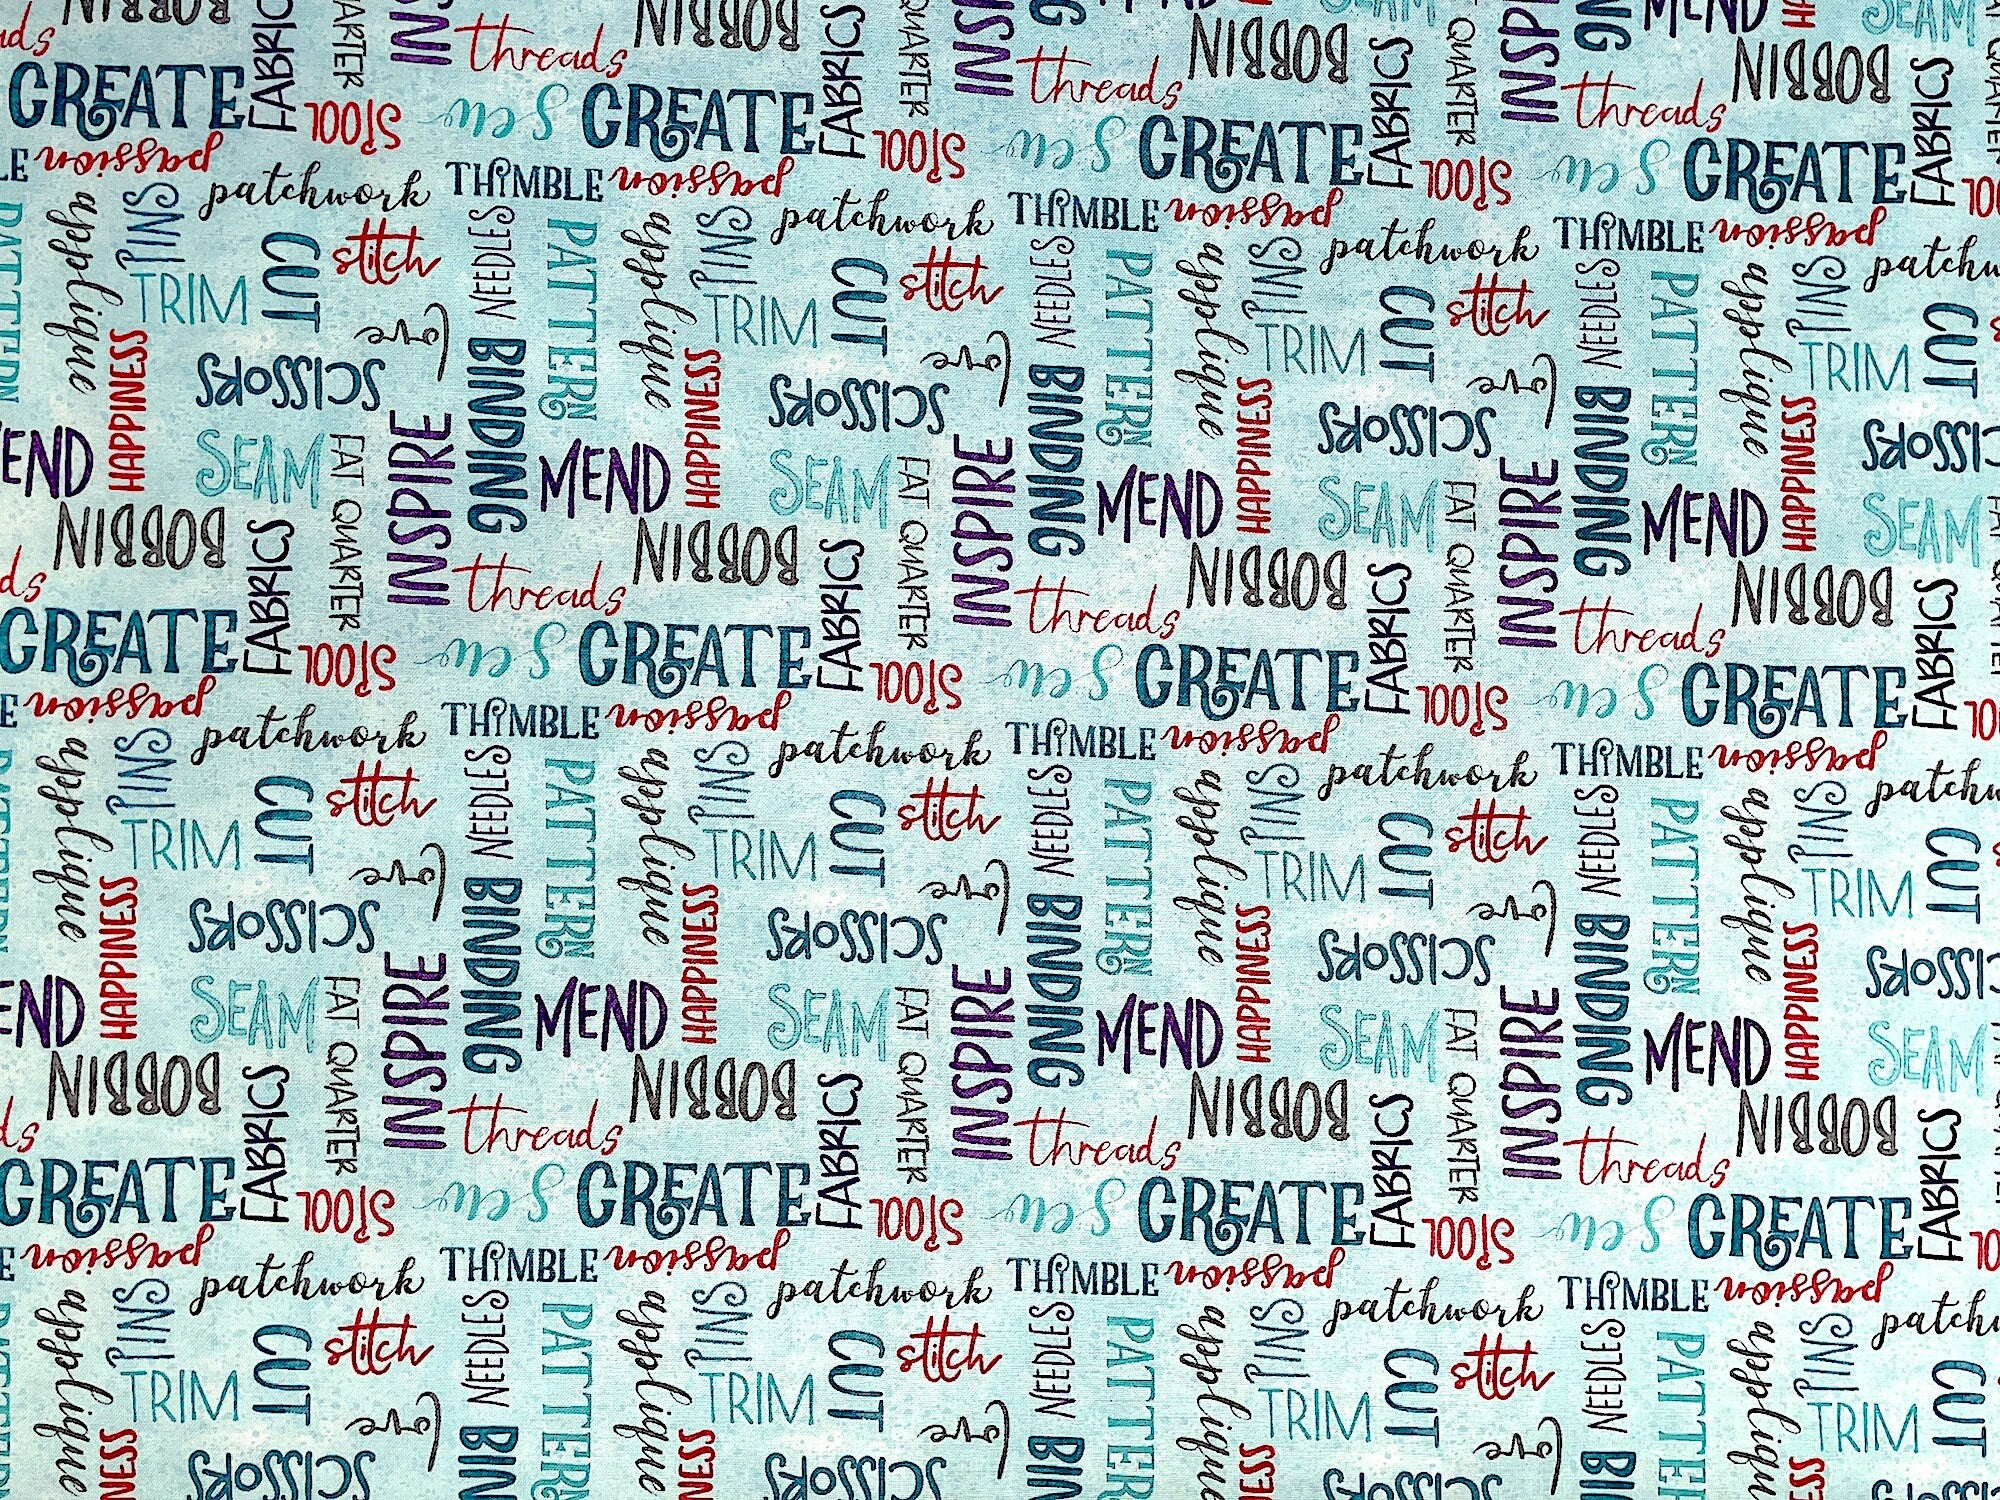 This blue cotton fabric is covered with sewing sayings such as trim, scissors, inspire, fat quarter, spool, passion, love, stitch, and more. This fabric is part of the Sew Be It collection by Wilmington Prints.